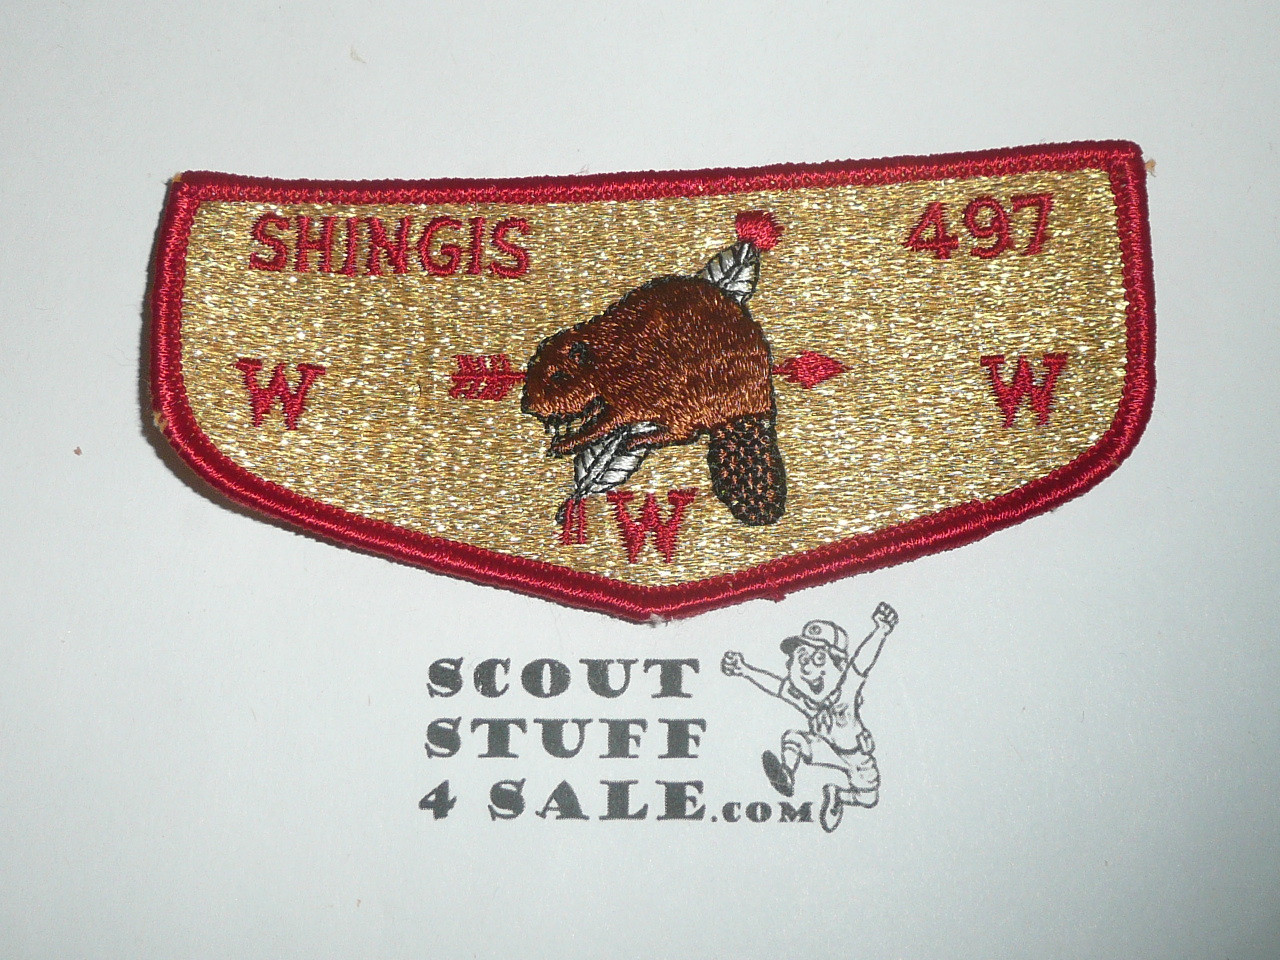 Order of the Arrow Lodge #497 Shingis f1b First Flap Patch